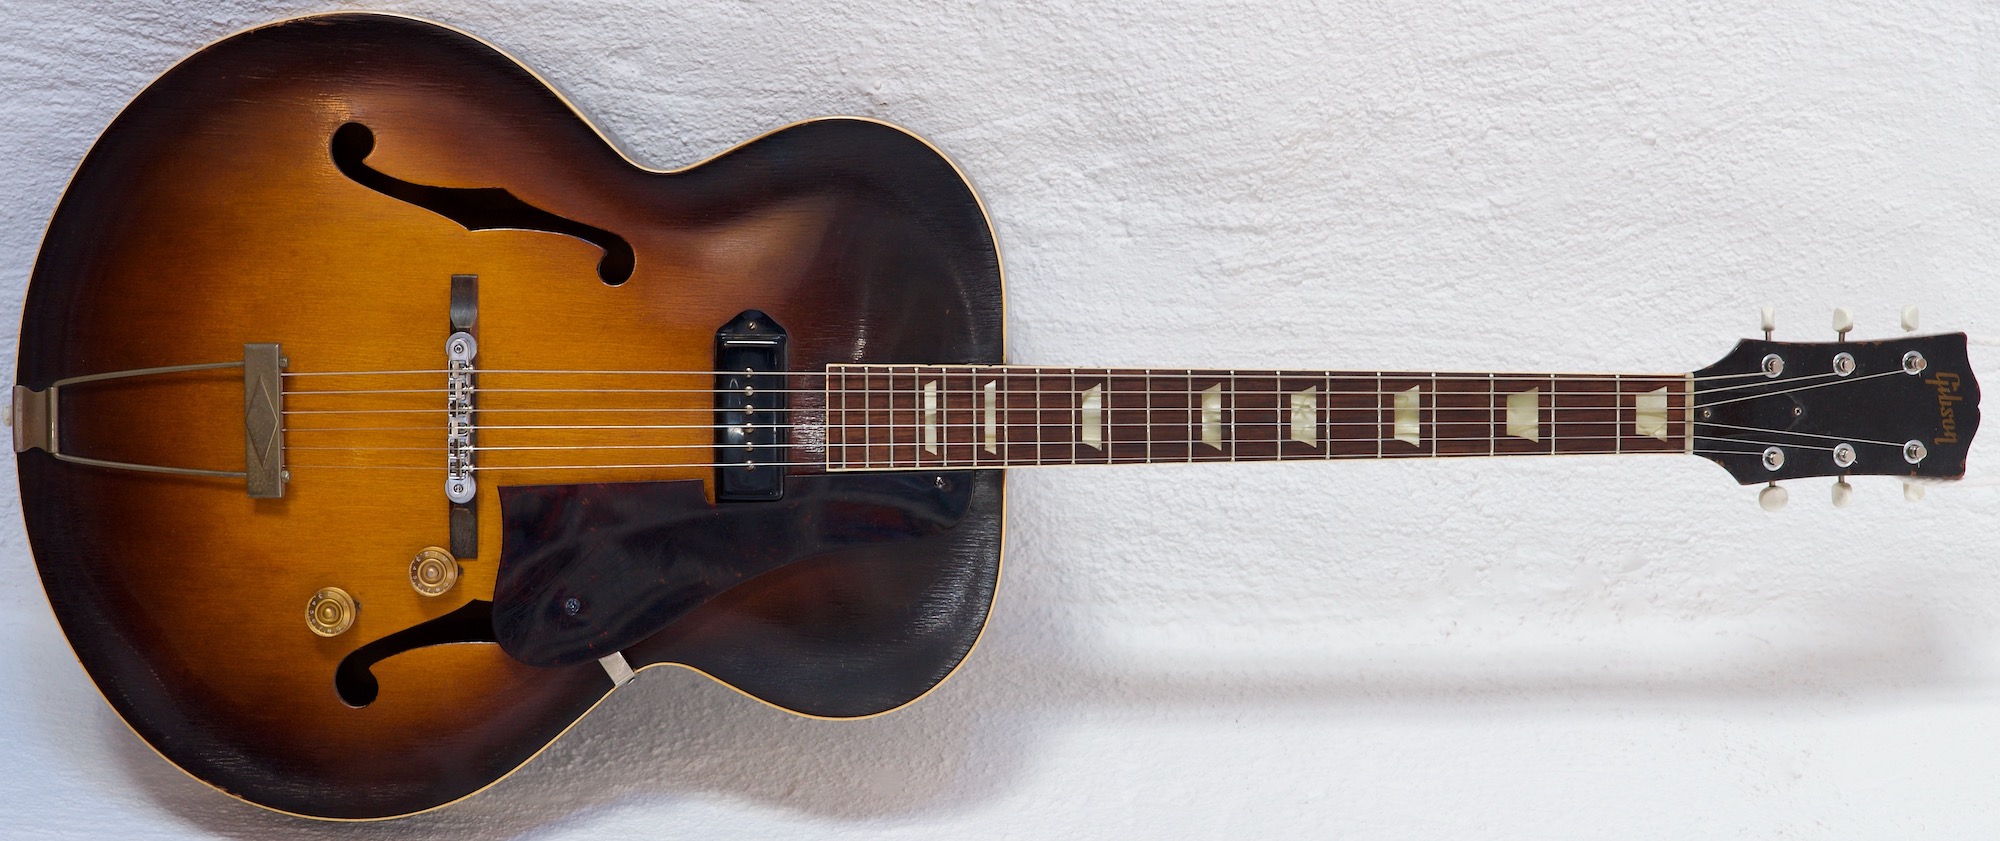 A Gibson ES-150 from 1950